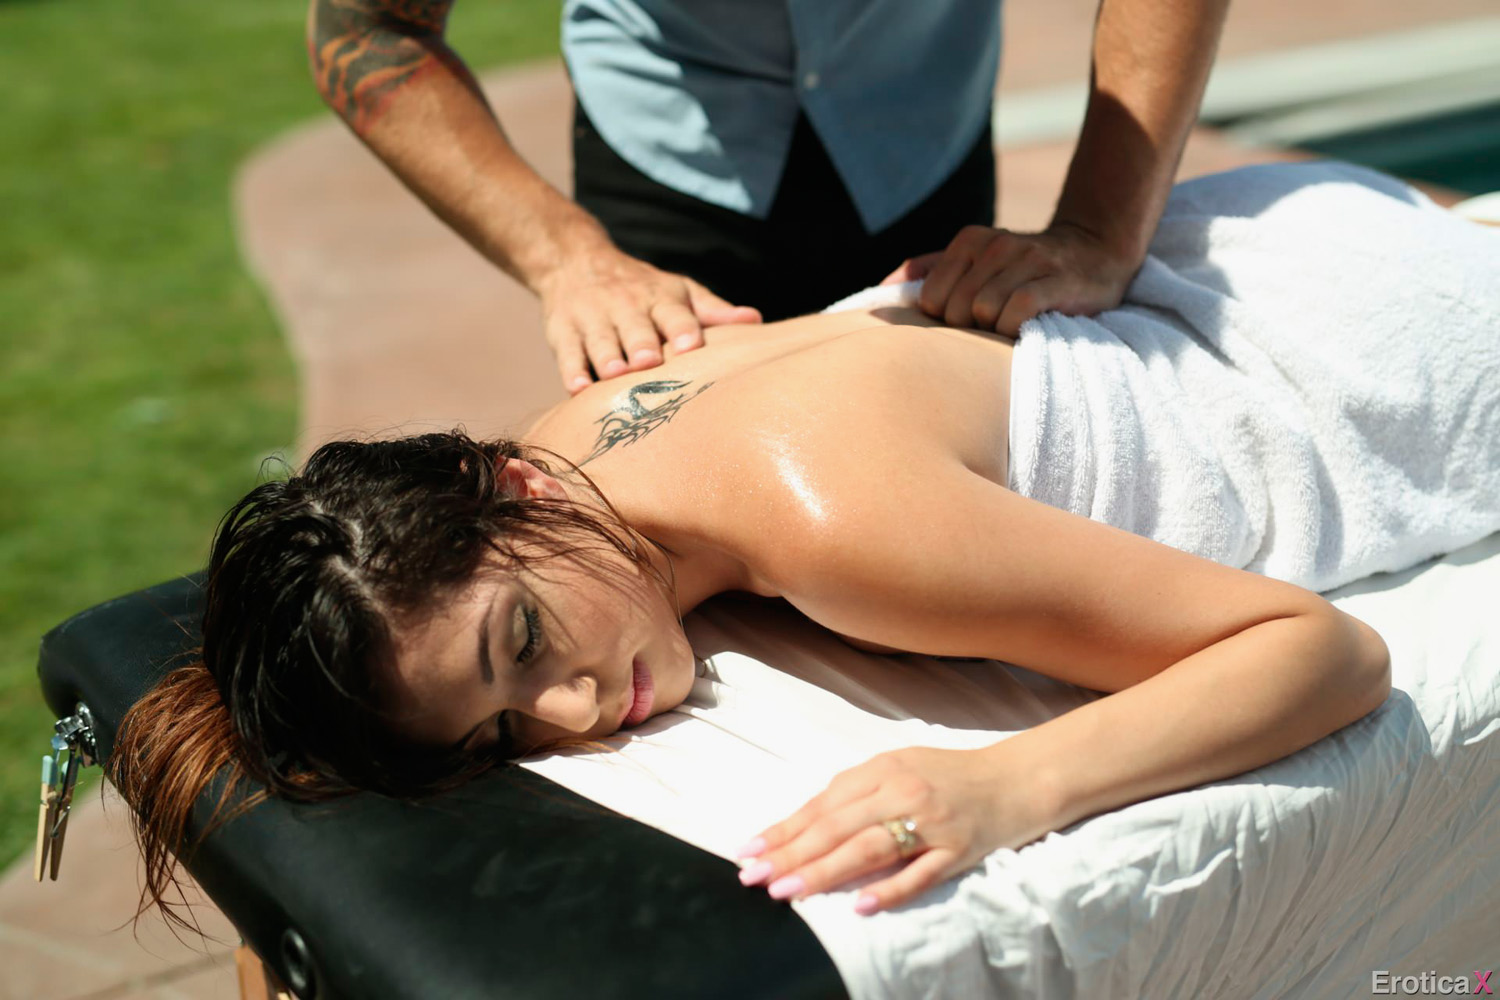 Judy Jolie gets drilled by her massage therapist in the blistering sun